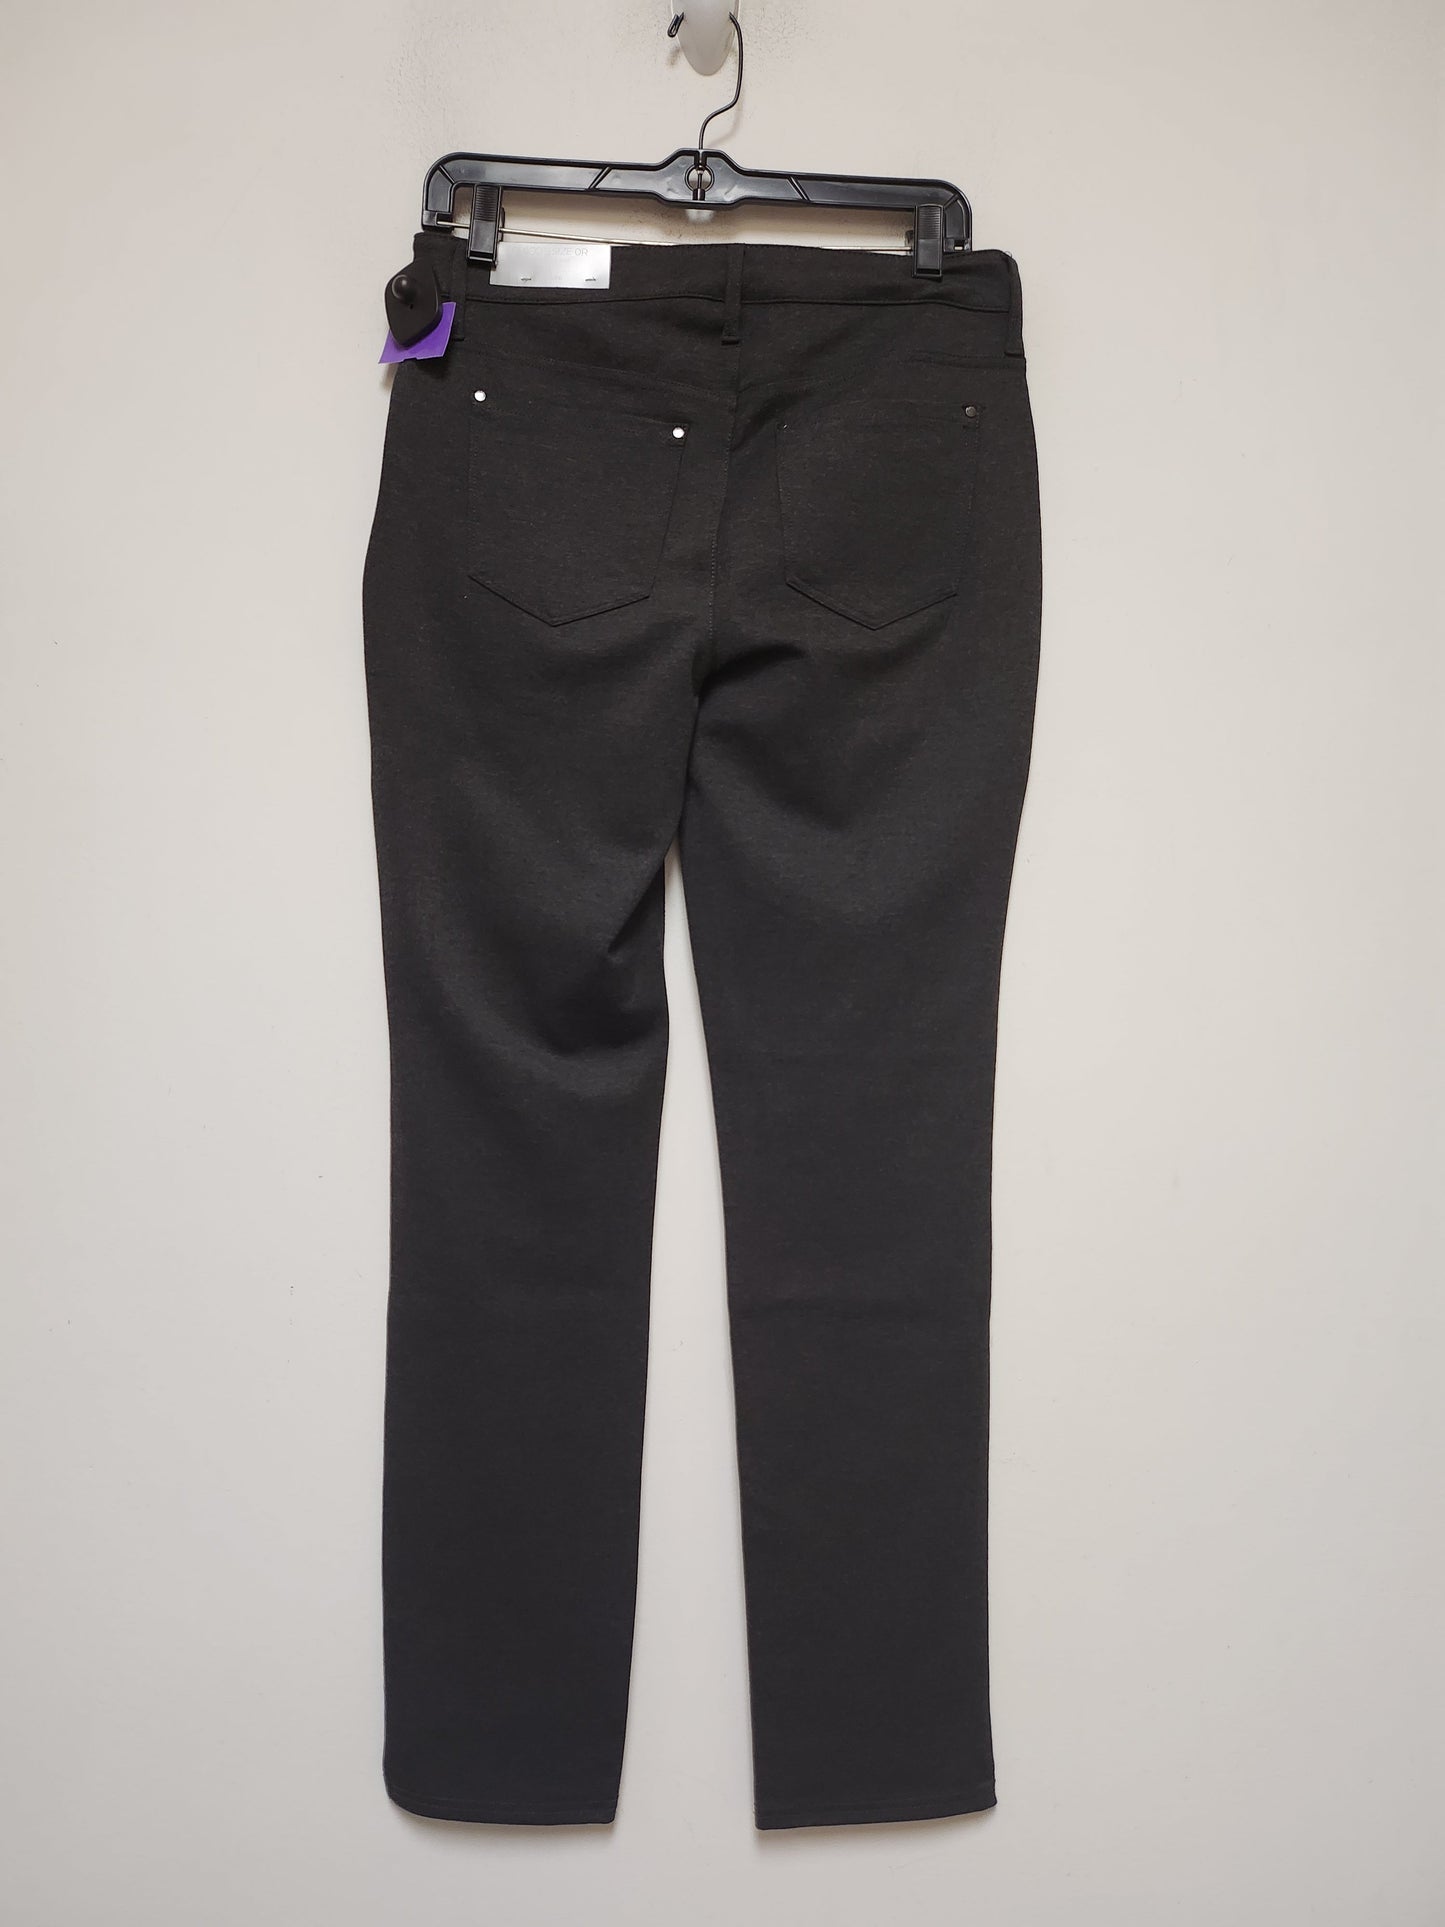 Black Pants Other Chicos, Size 4